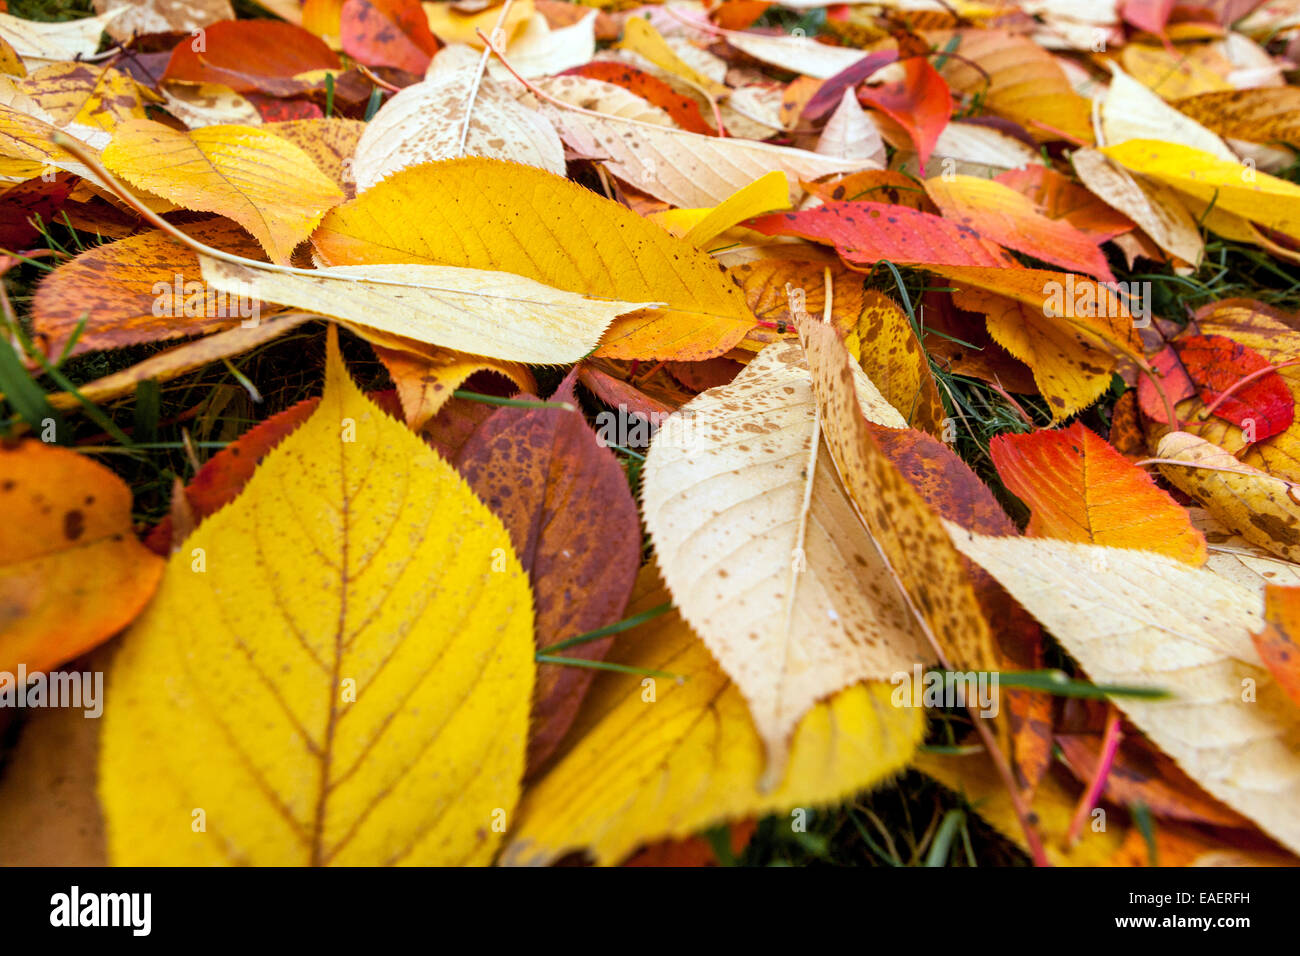 Fallen autumn Leaves on the ground lying on a grass Autumn leaves fallimg, fallen leaves closeup Stock Photo